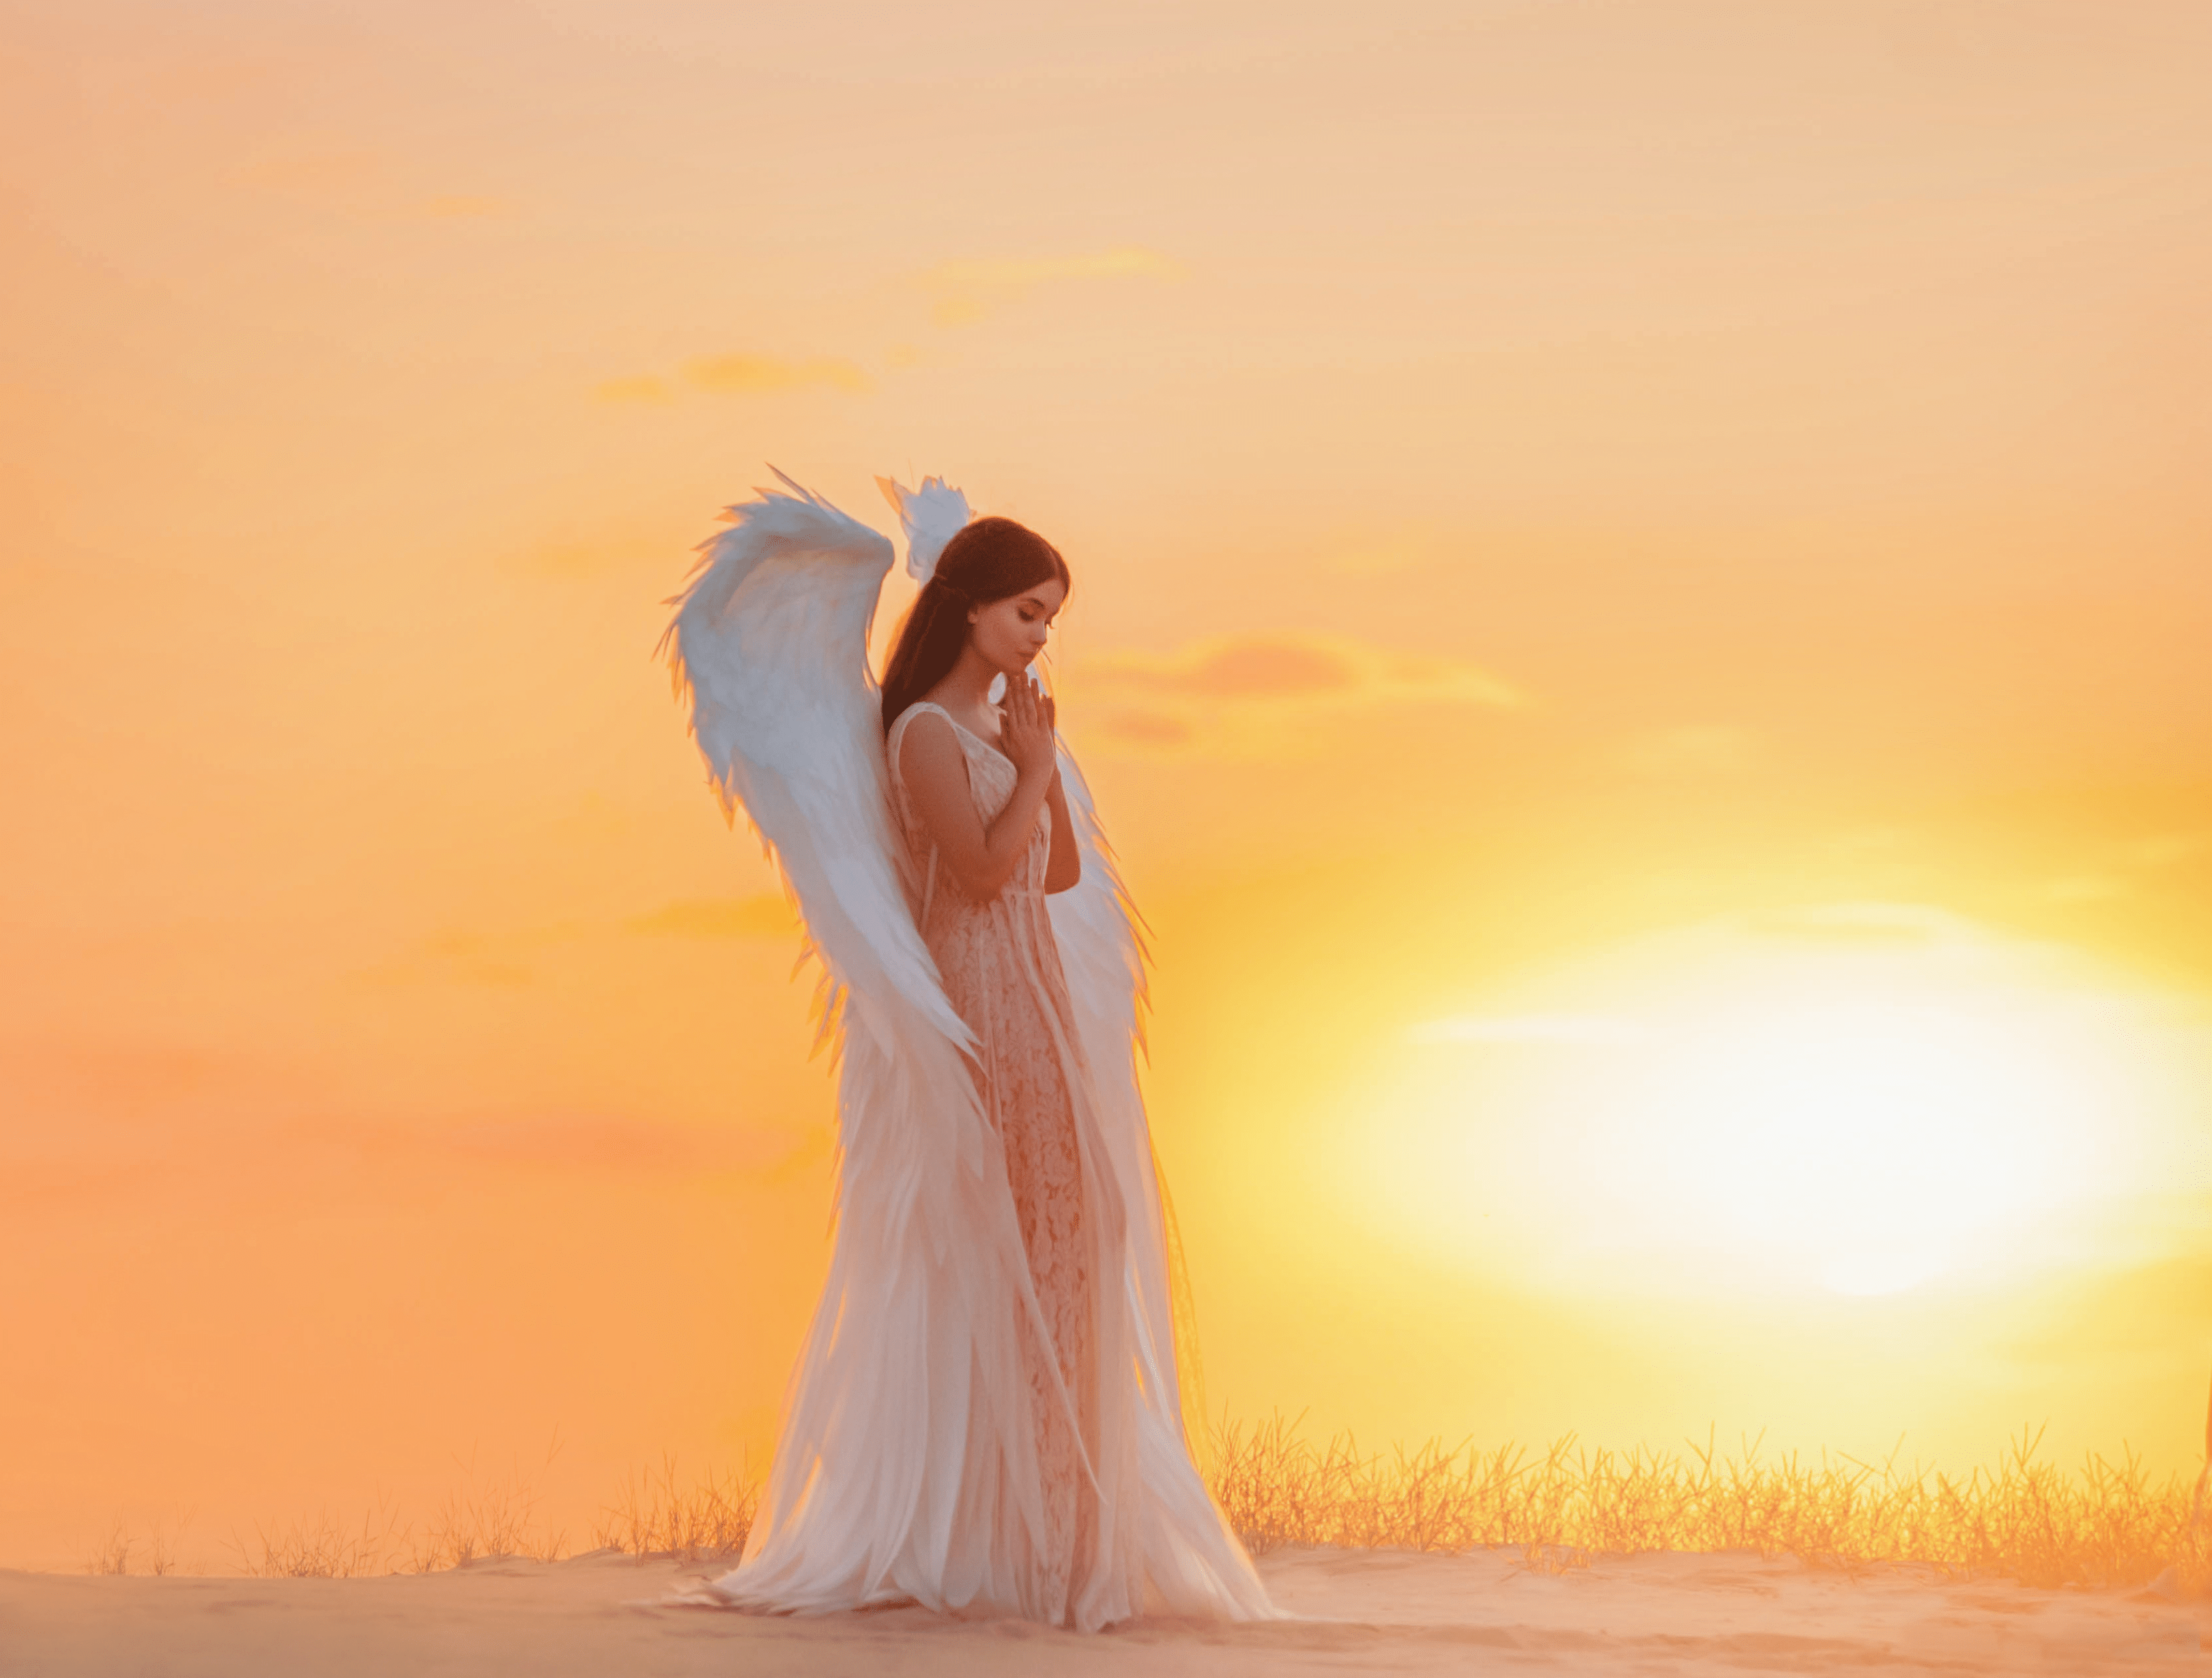 Attractive young woman angel stands in desert praying. Creative glamour design costume clothes with bird wings feathers. Bright yellow color sunset dramatic heaven. Photo Shoot Divine Fairy Spirit.